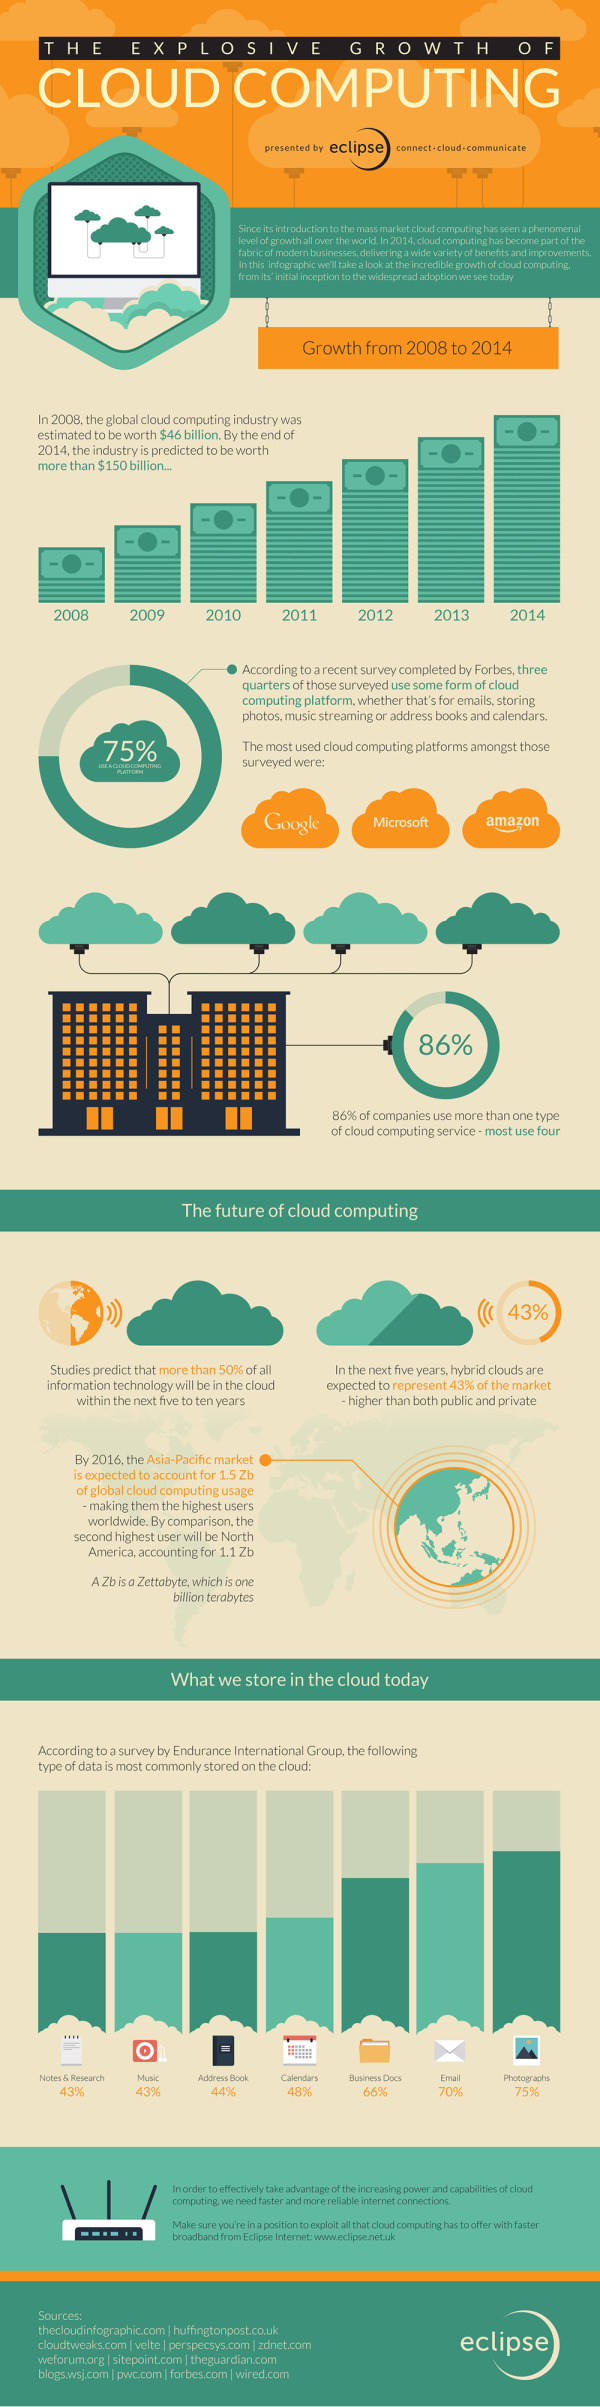 The Explosive Growth of Cloud Computing infographic